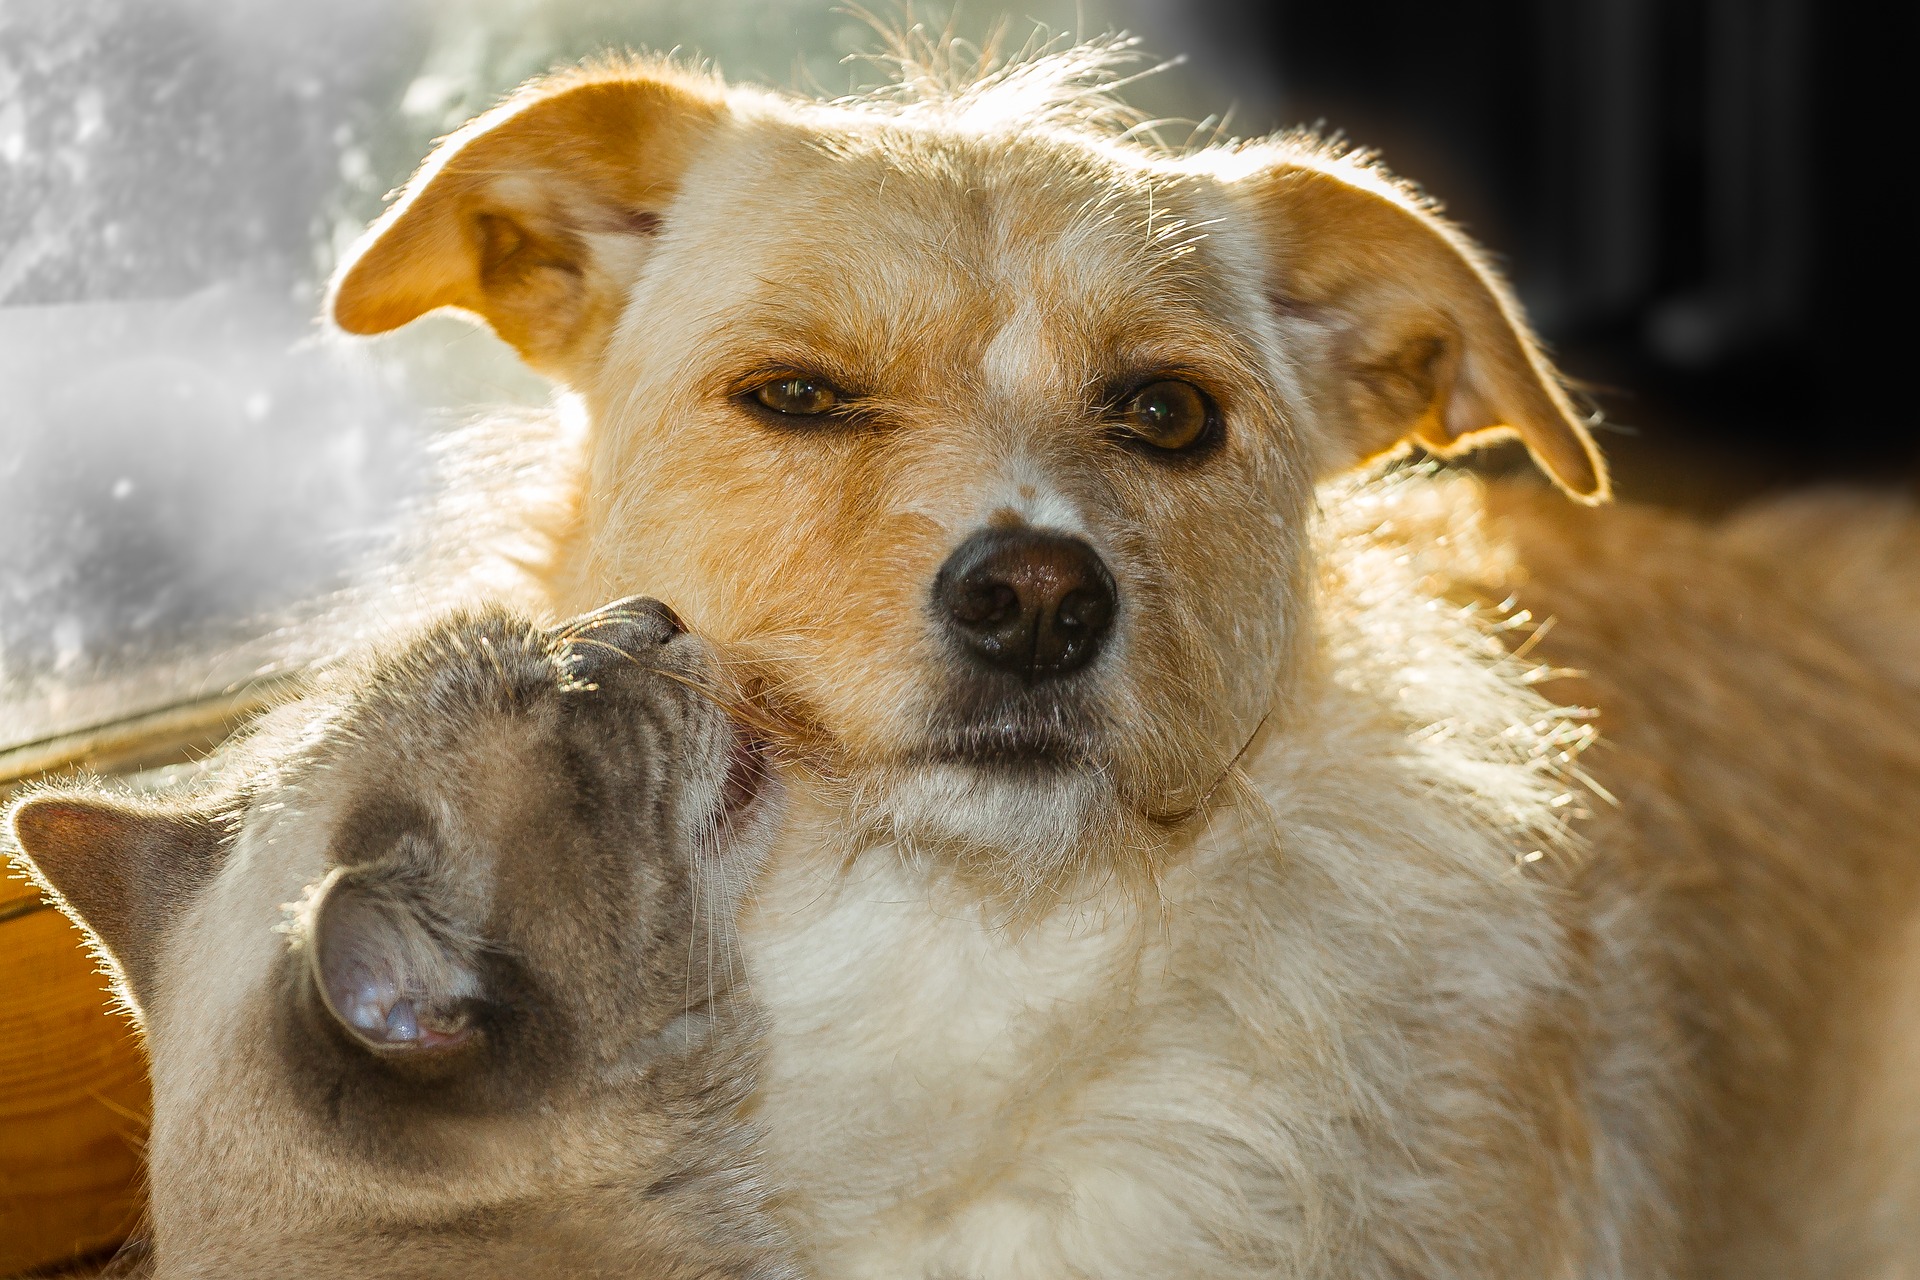 A cat grooming a dog